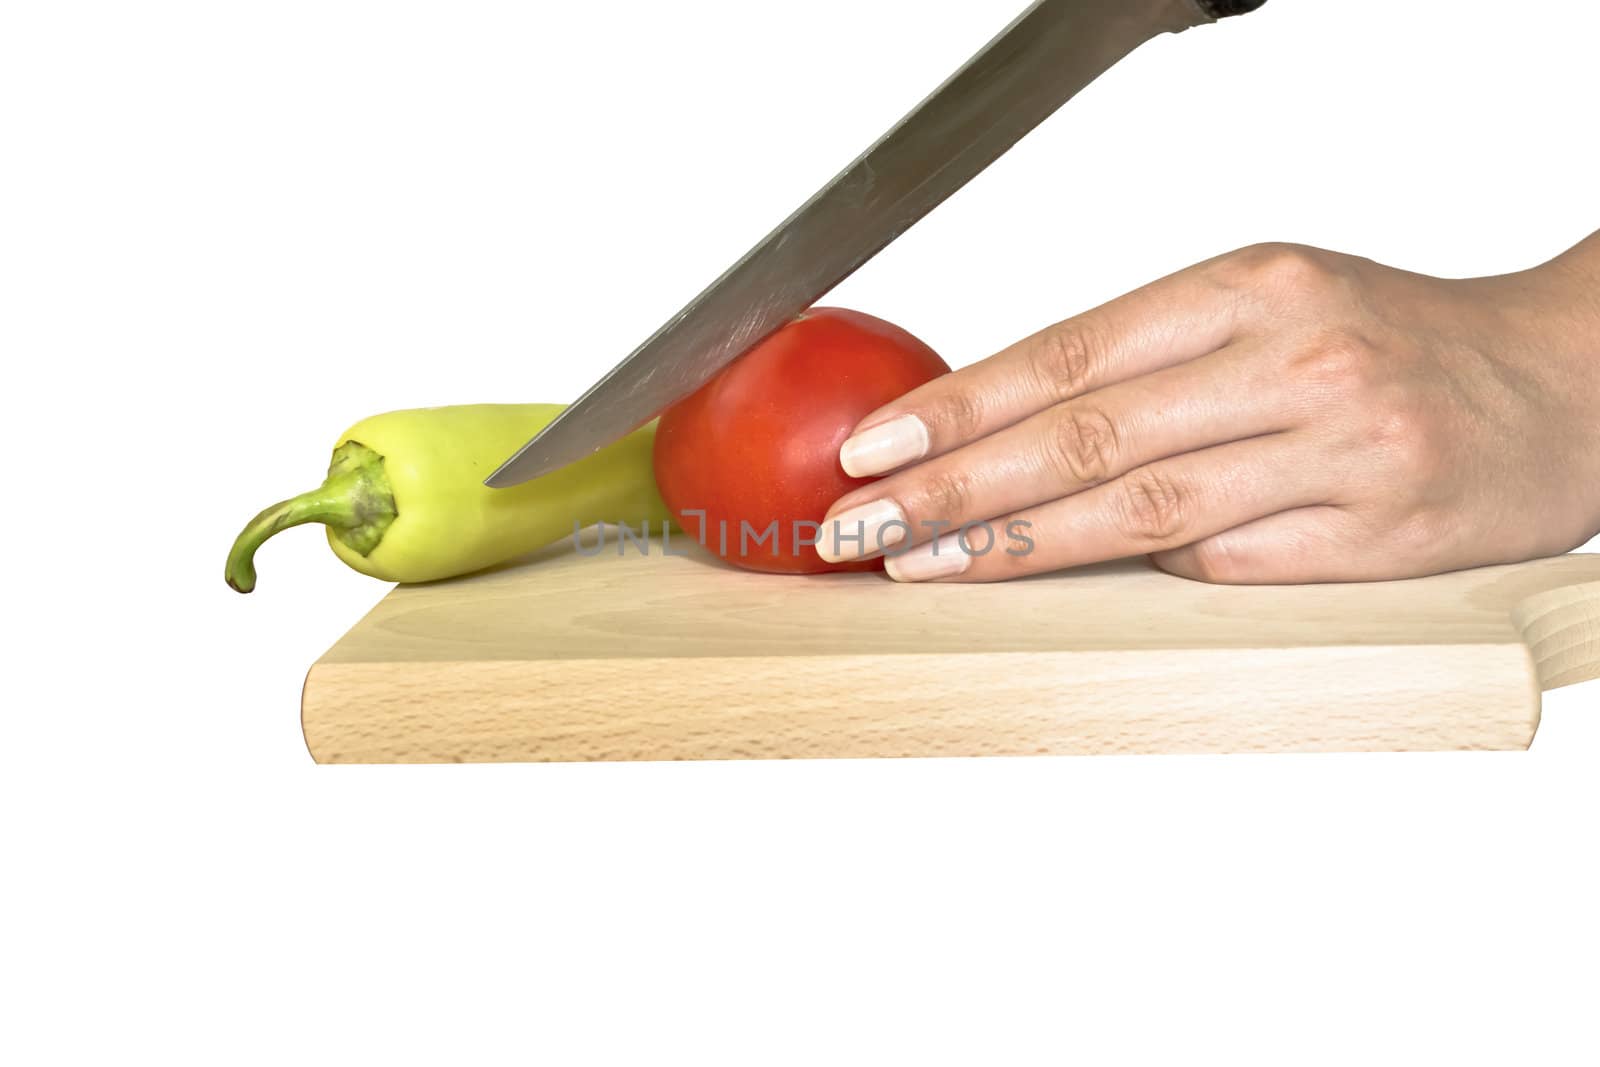 Cutting tomato on wooden board
background, bio, blade, board, calorie, chef, chop, circle, cook, cooking, culinary, cut, delicious, diet, dieting, female, fingers, food, fresh, freshness, gourmet, hand, health, healthy, ingredient, kitchen, knife, lunch, meal, natural, object, organic, preparation, red, restaurant, ripe, round, salad, sharp, slice, sliced, slicing, tasty, tomato, vegetable, vegetarian, vitamin, woman, wooden, working        Cutting tomato on wooden board